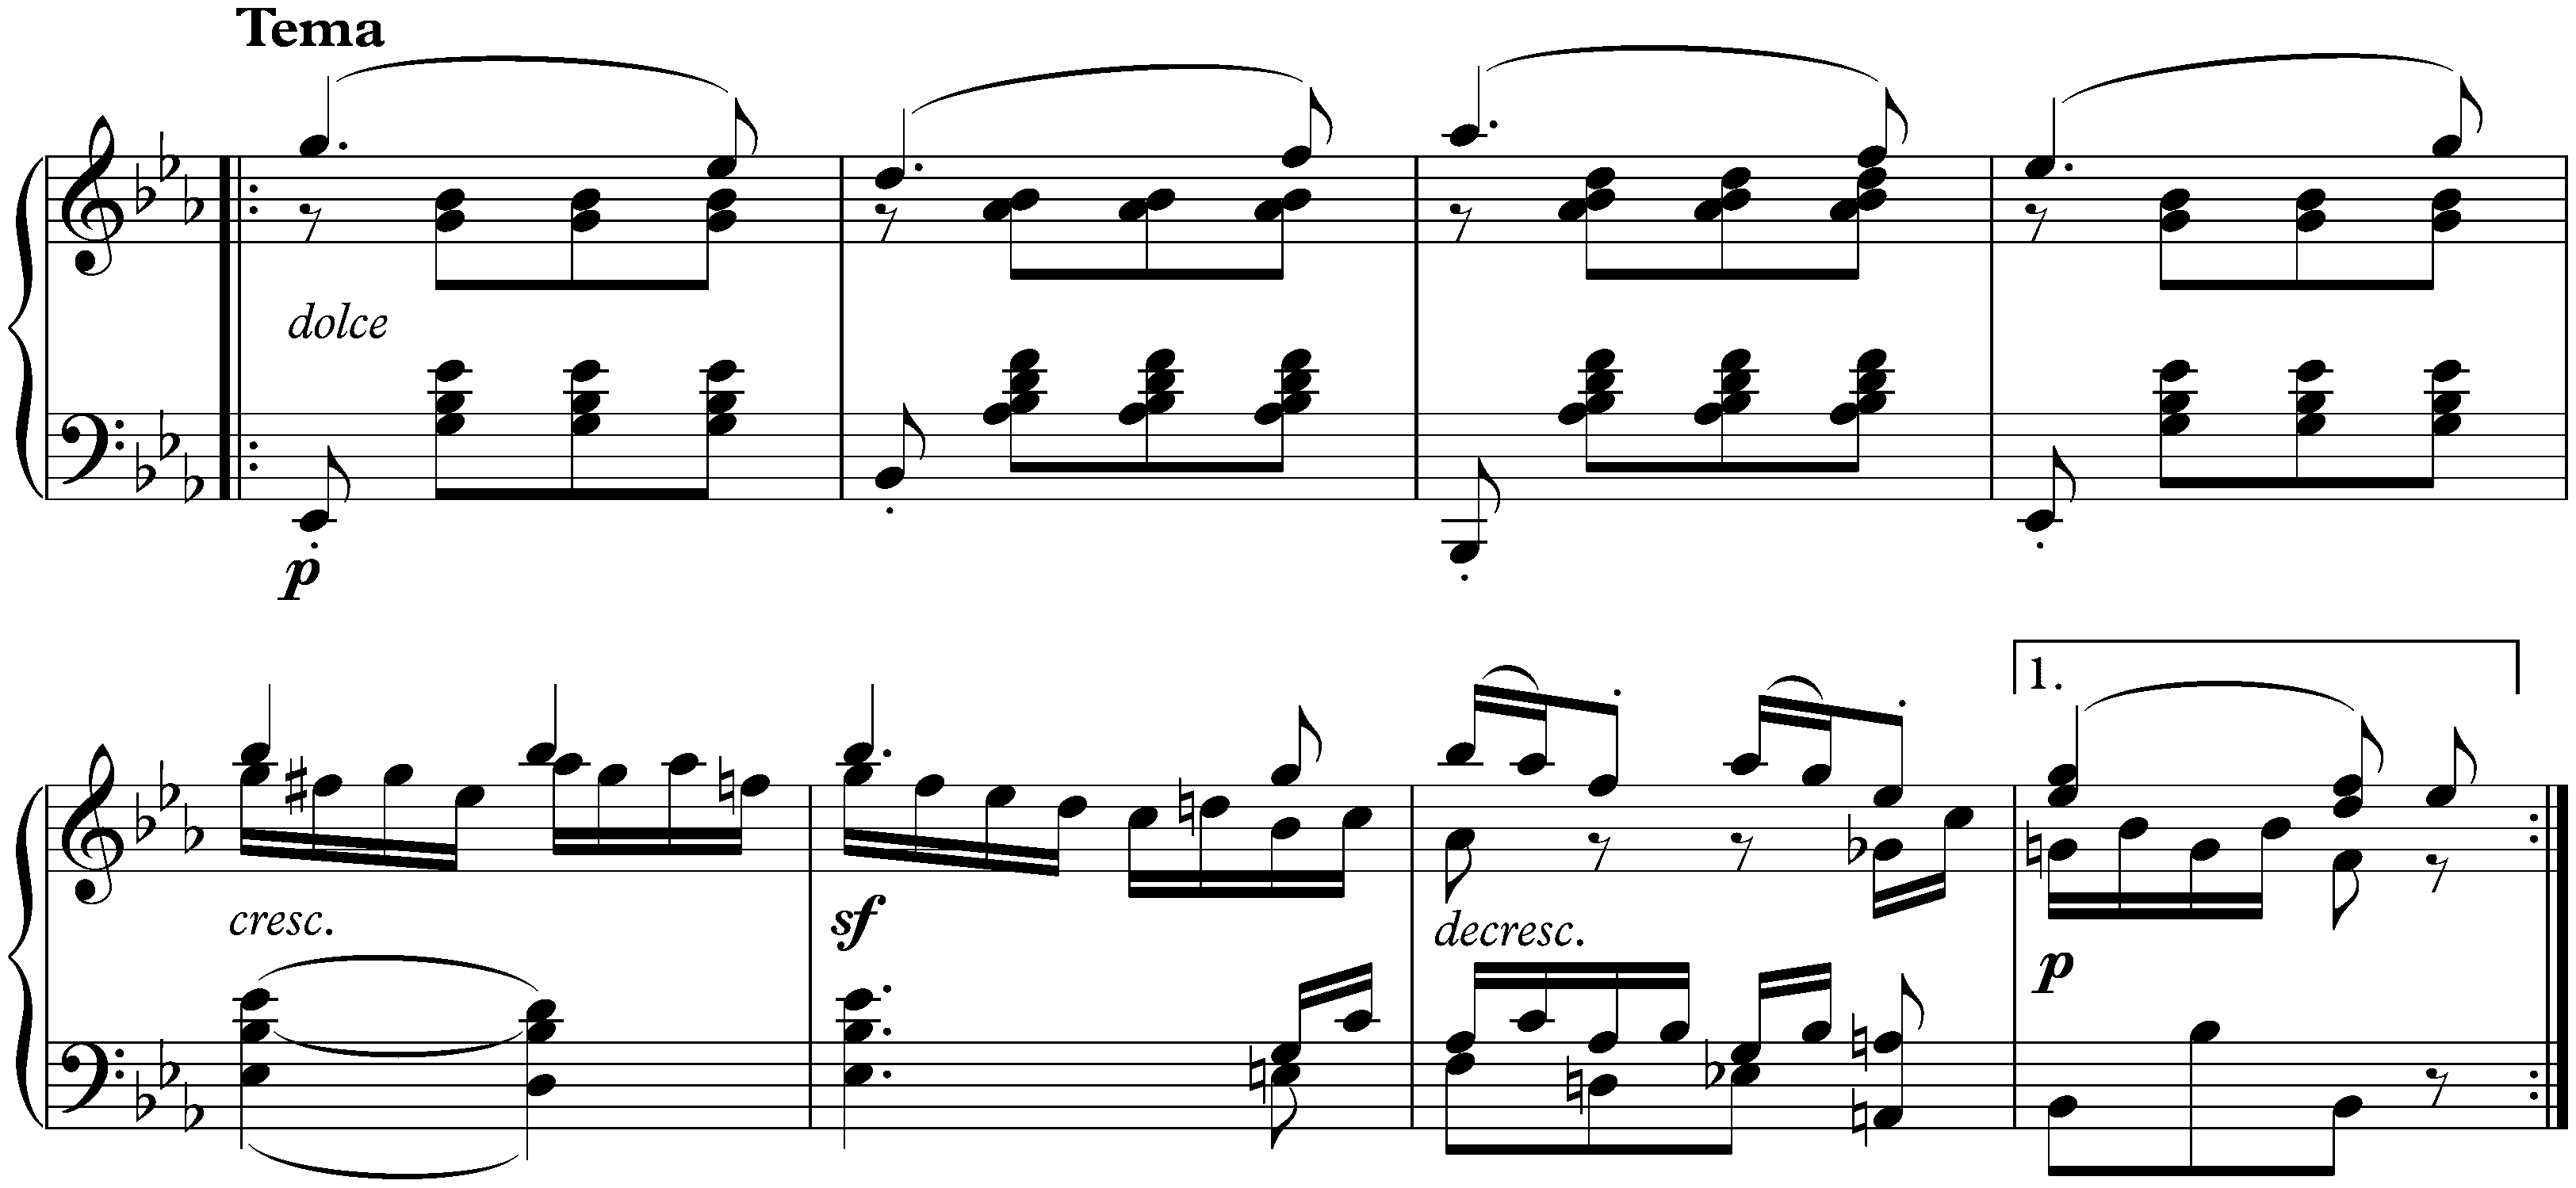 Variations and Fugue in E-flat major, op. 35